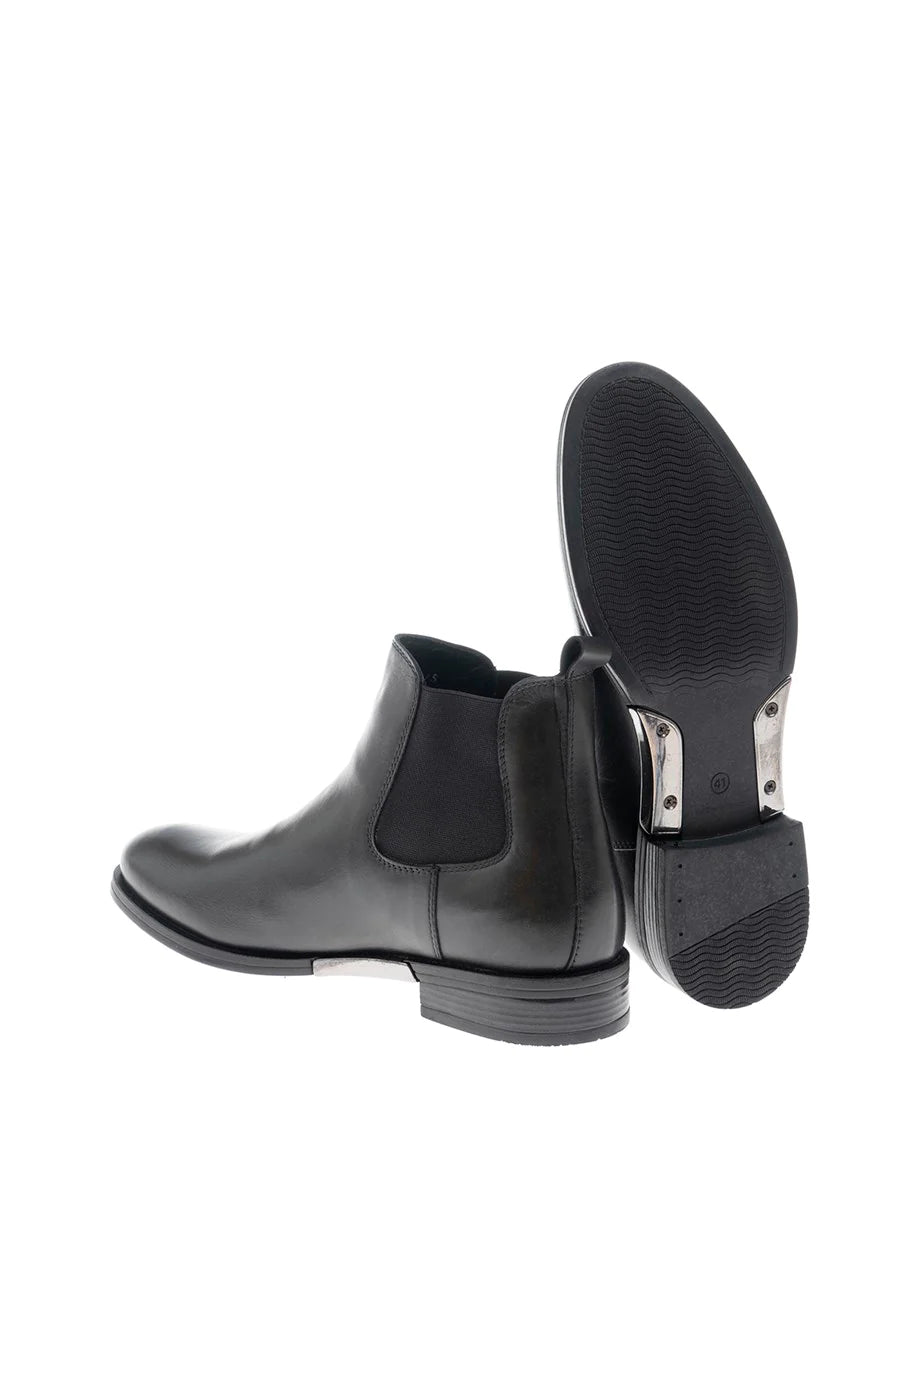 Harrison MenStyleWith Special Edition Black Chelsea Boots